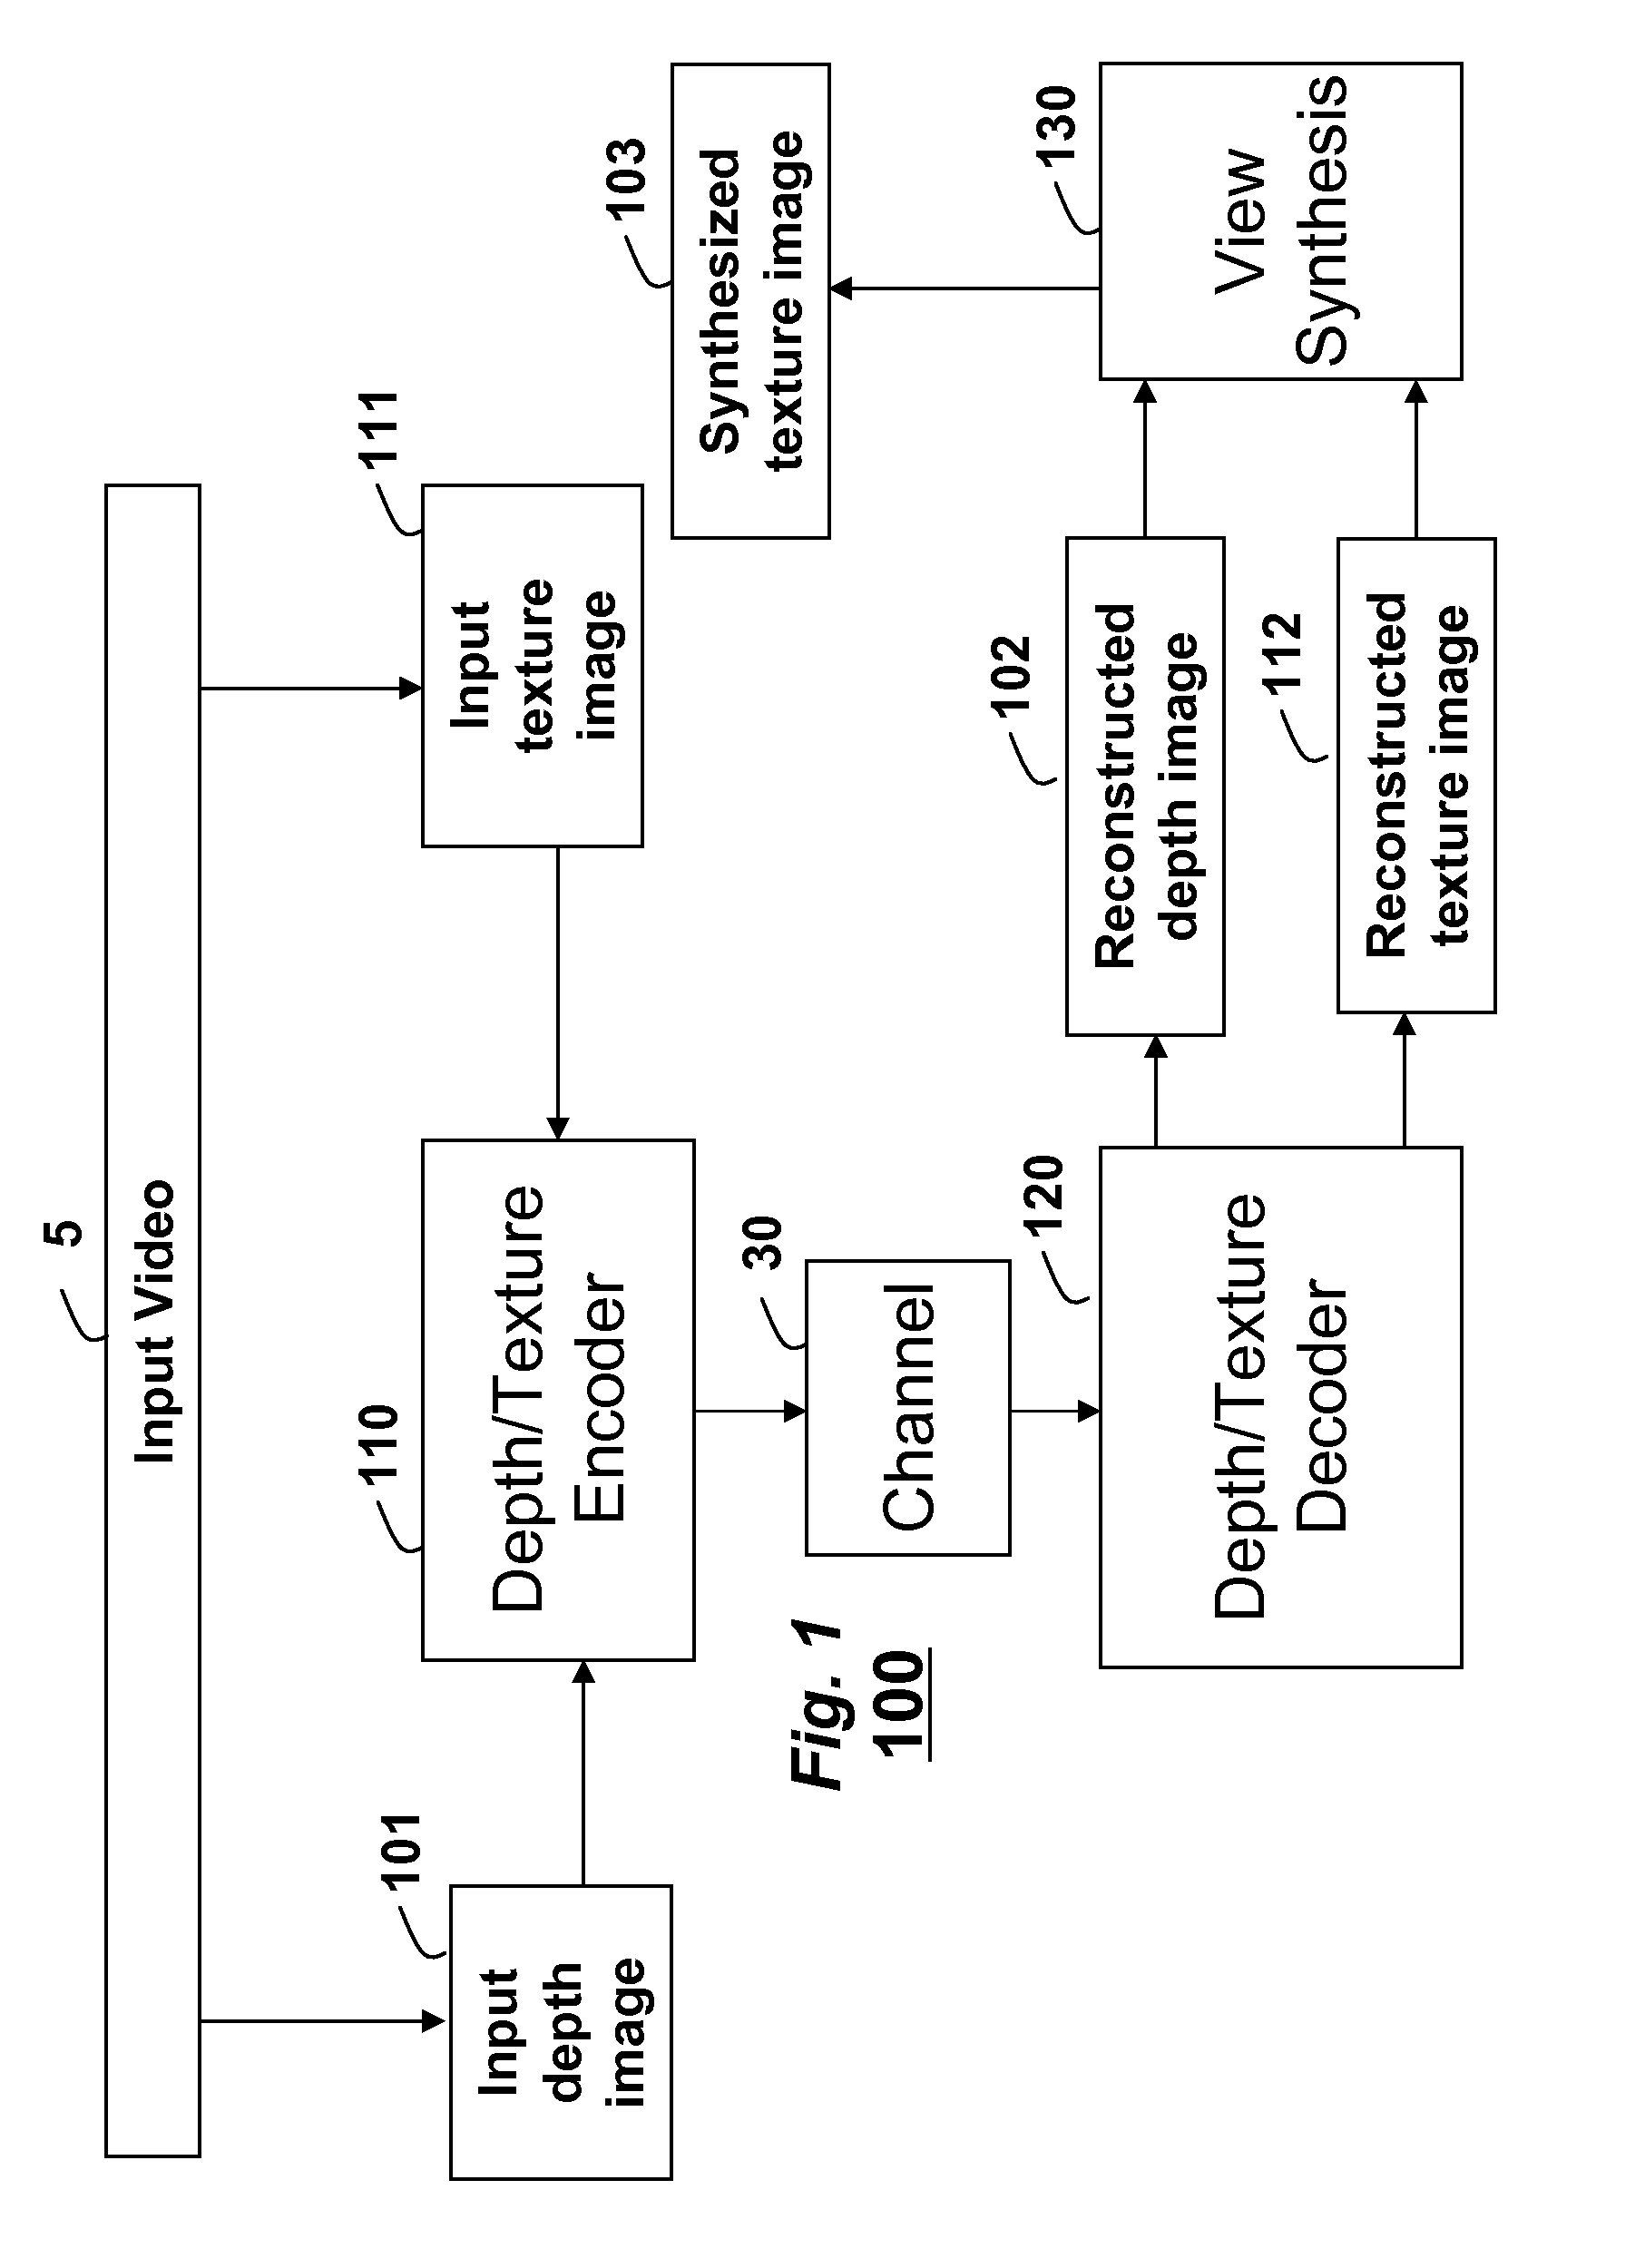 Method for virtual image synthesis